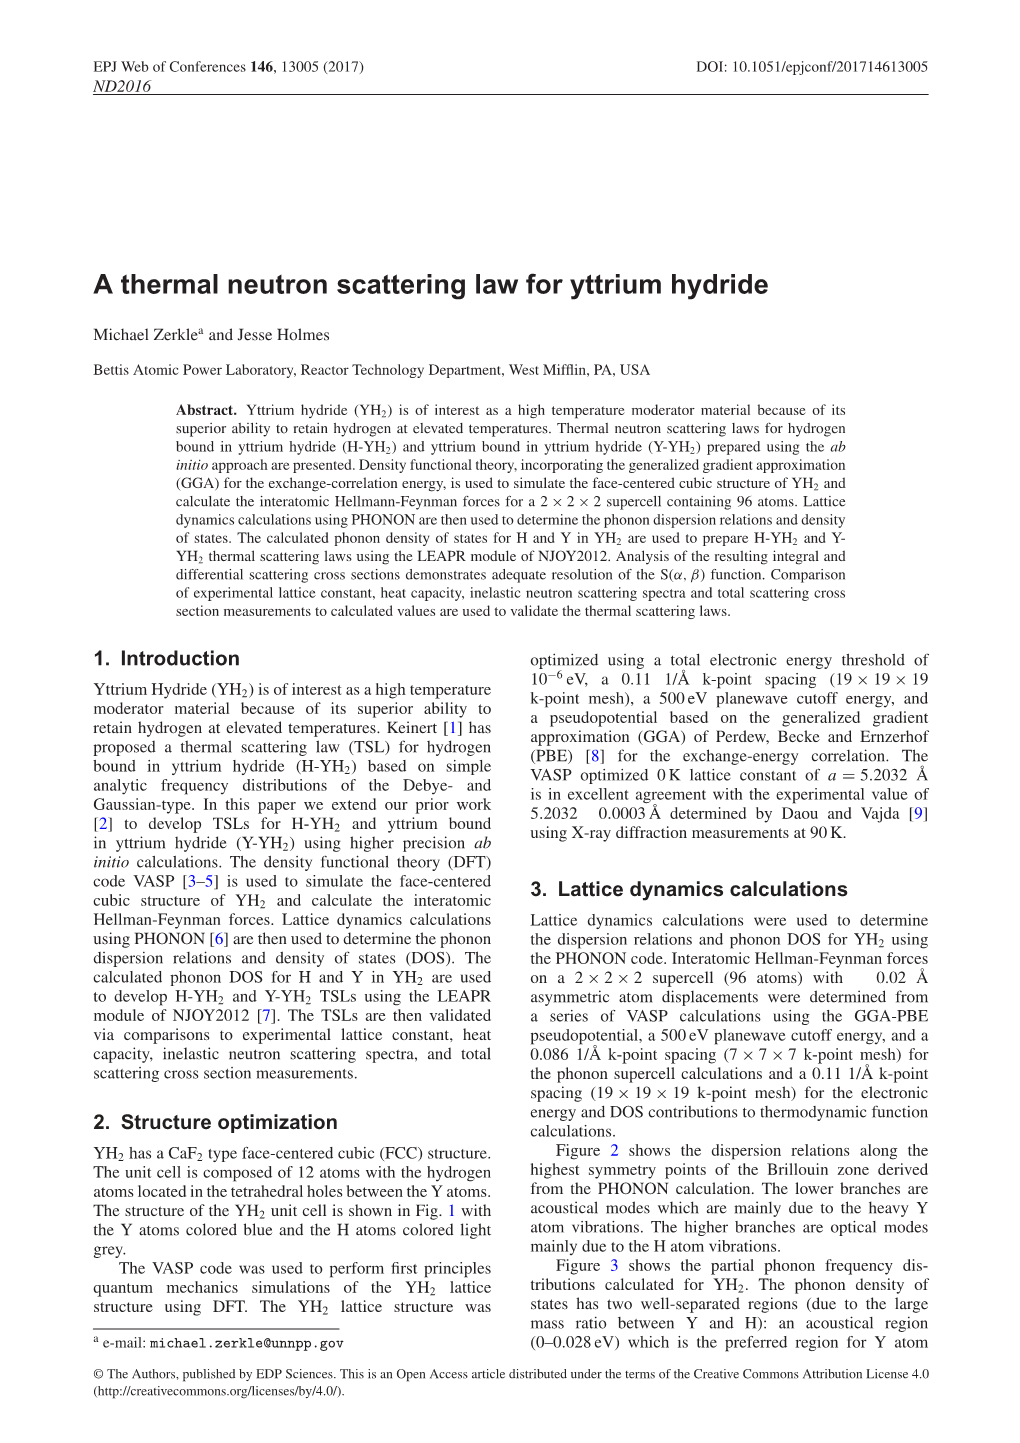 A Thermal Neutron Scattering Law for Yttrium Hydride